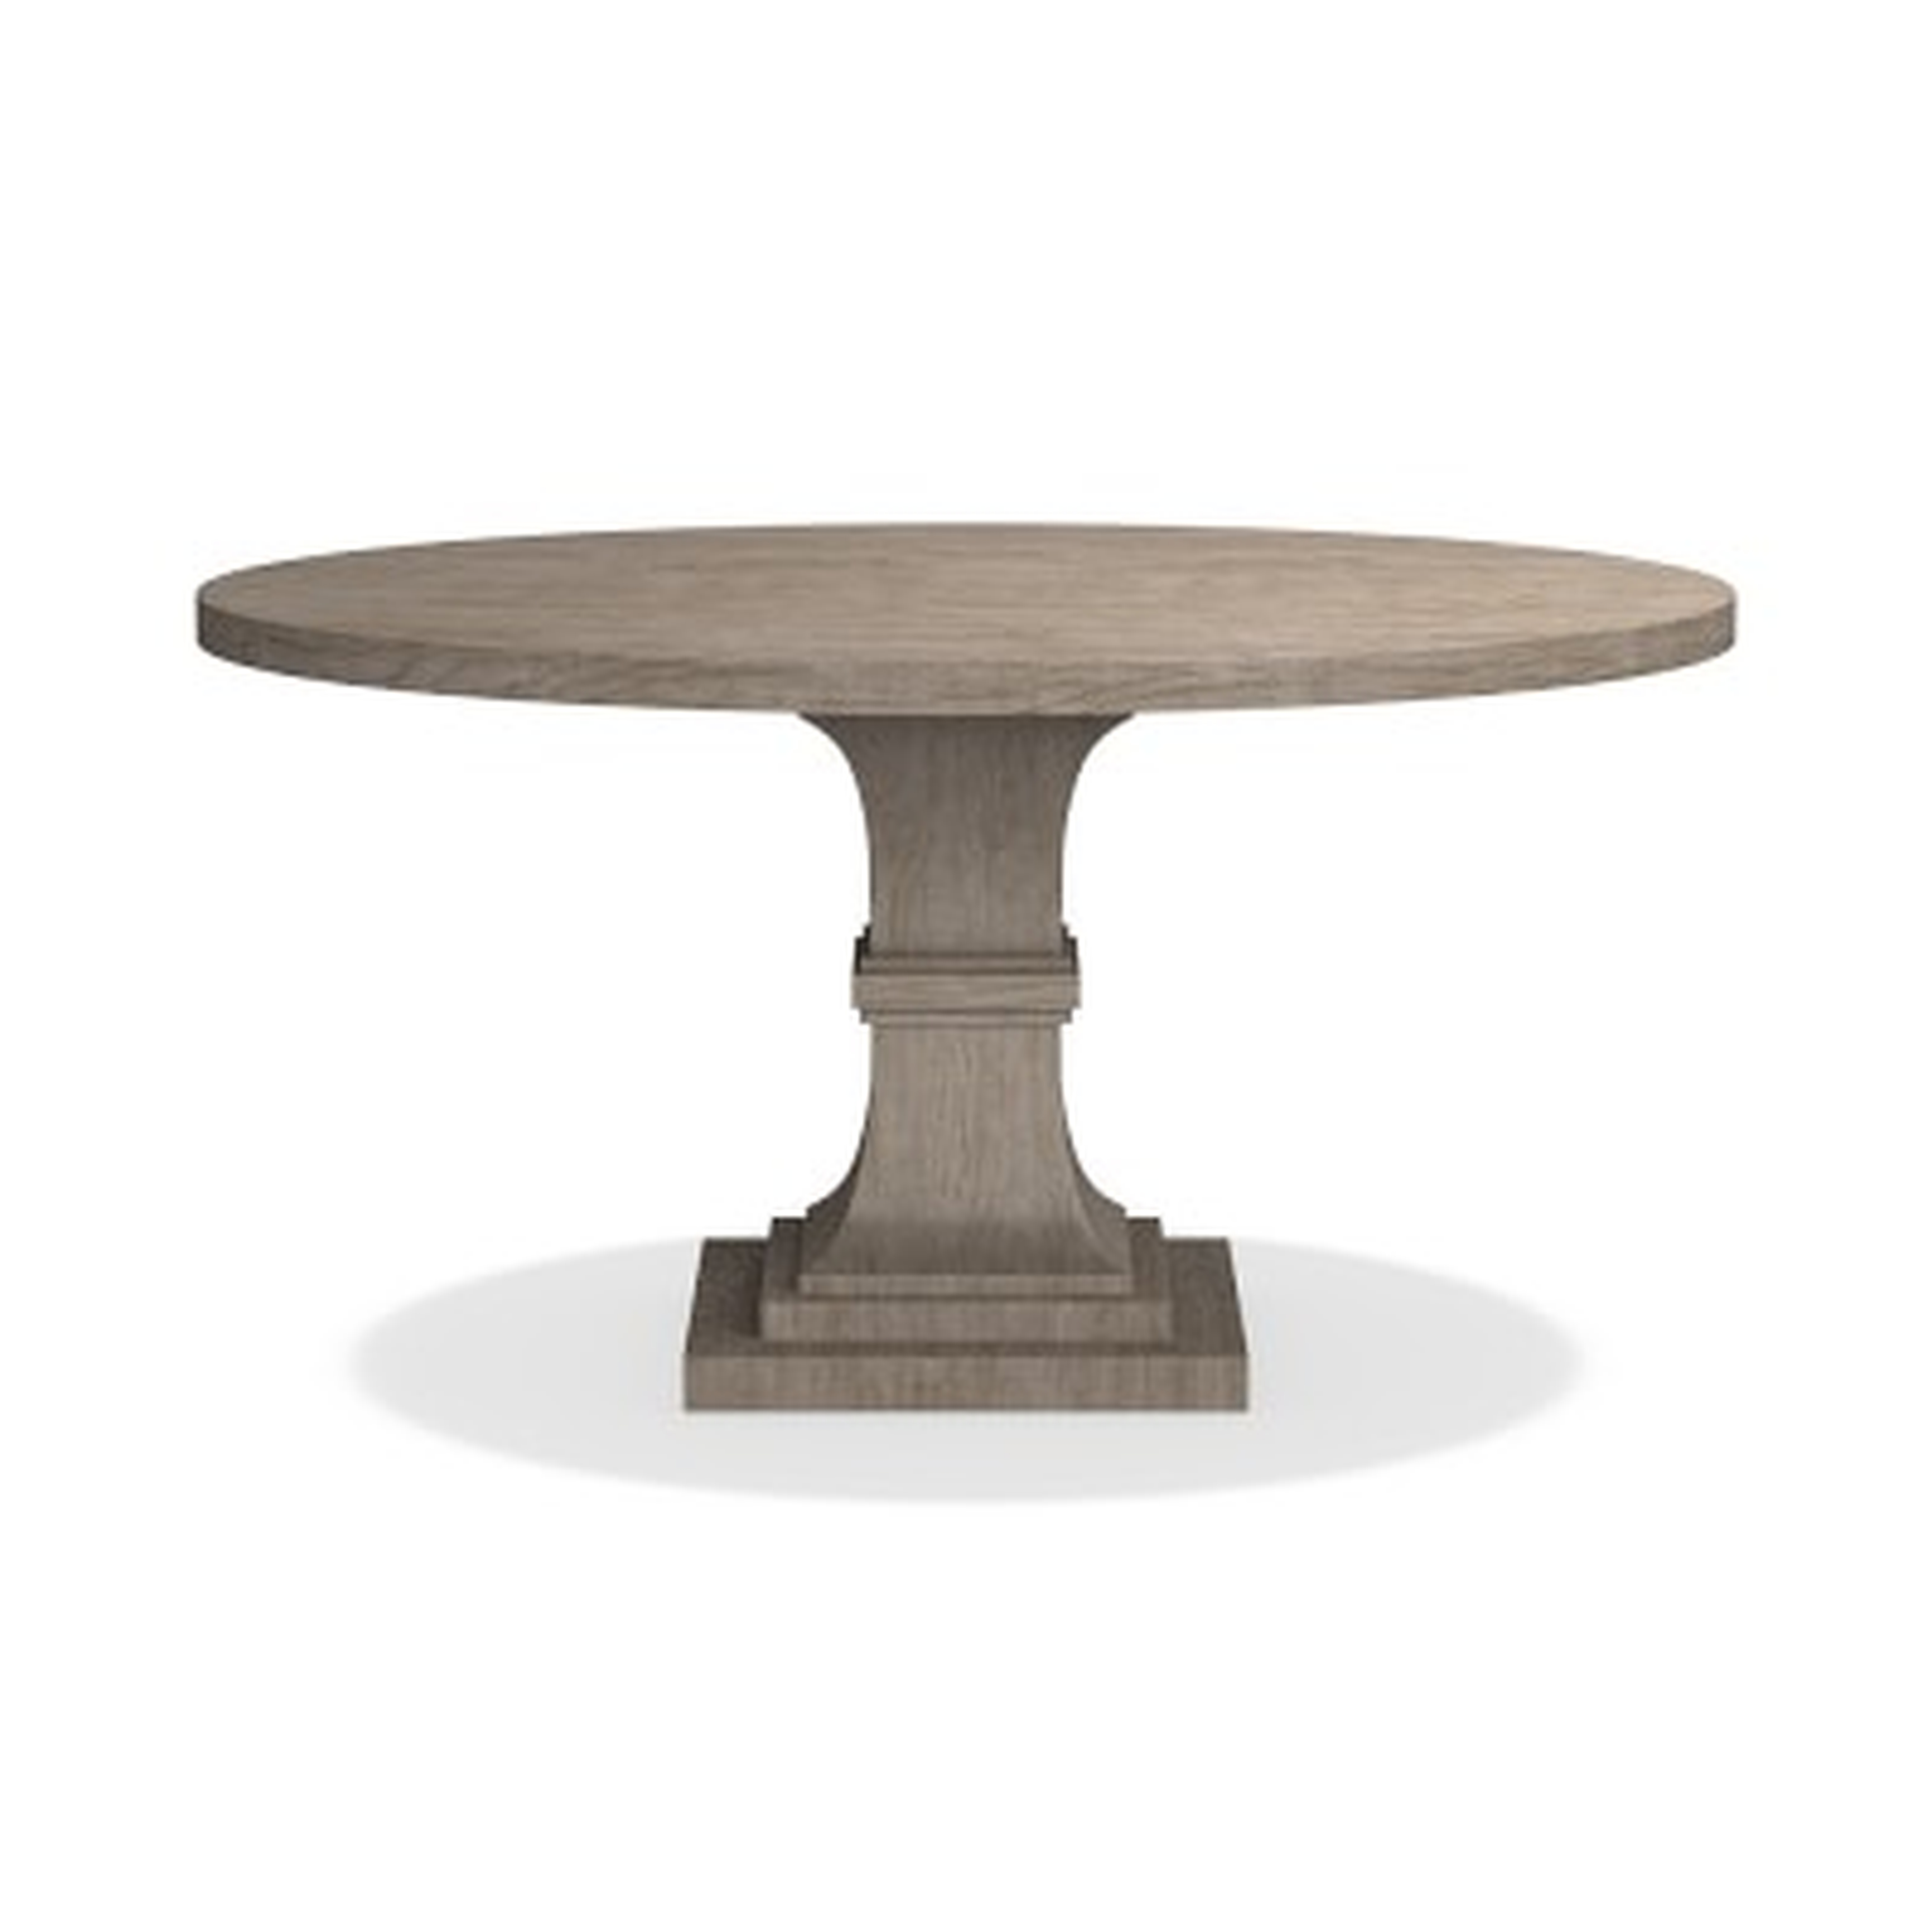 Pedestal Round Dining Table, Brown - Williams Sonoma